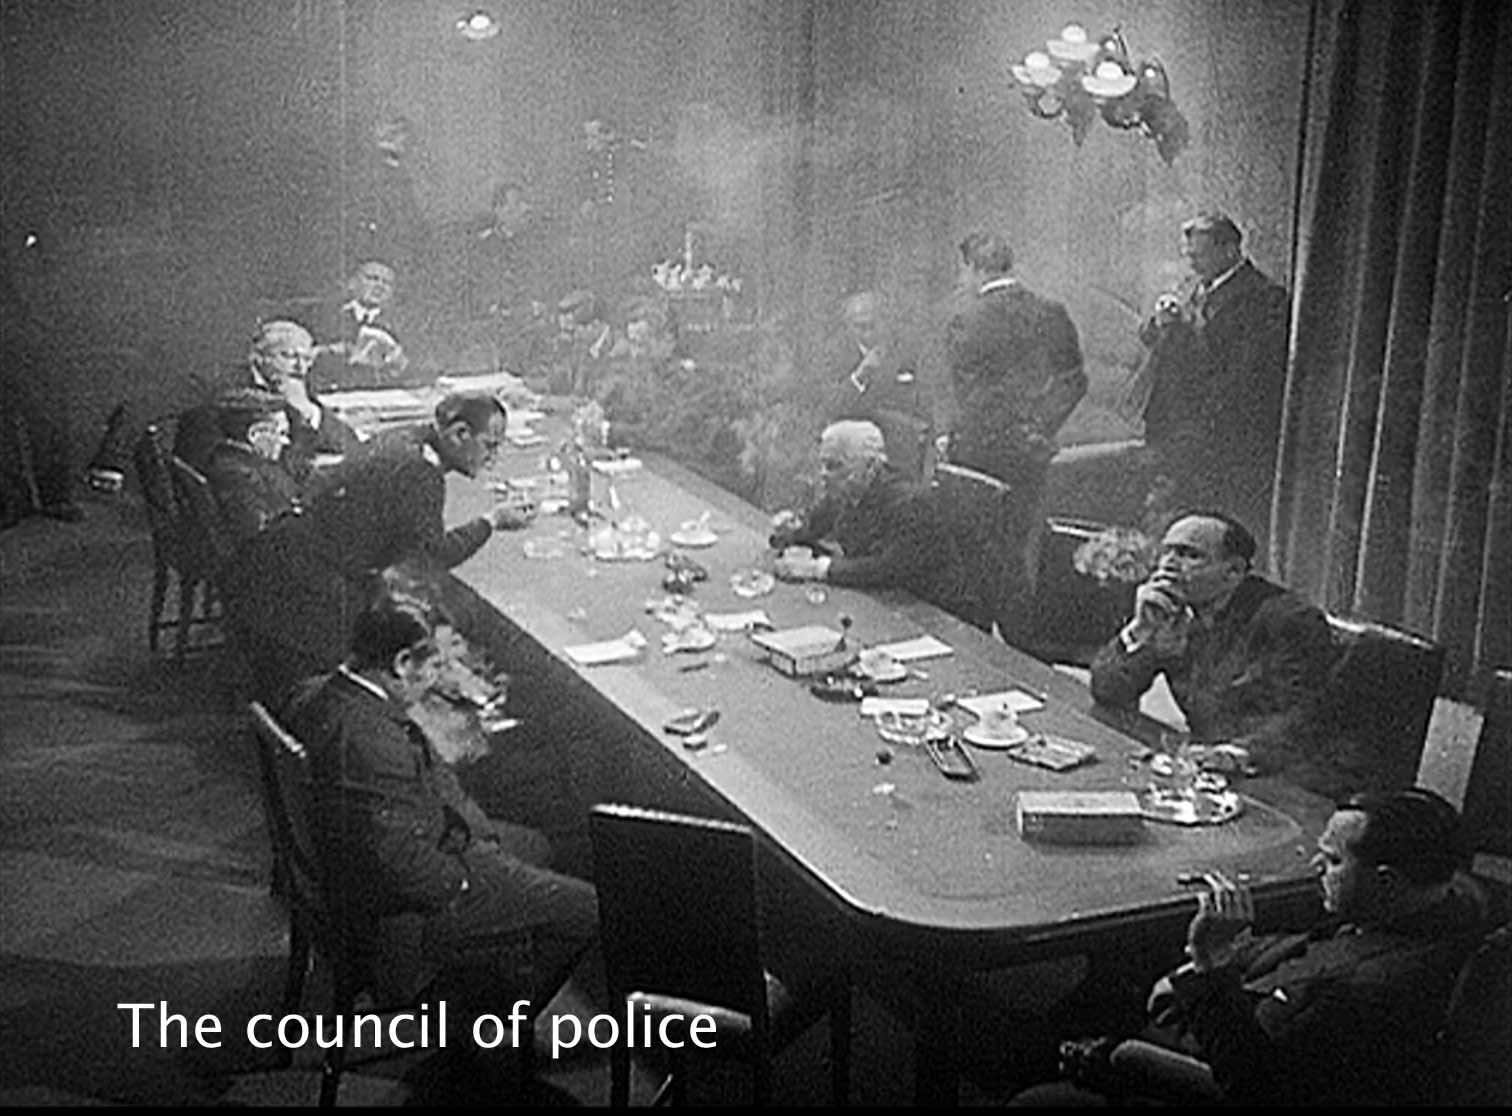 The council of police